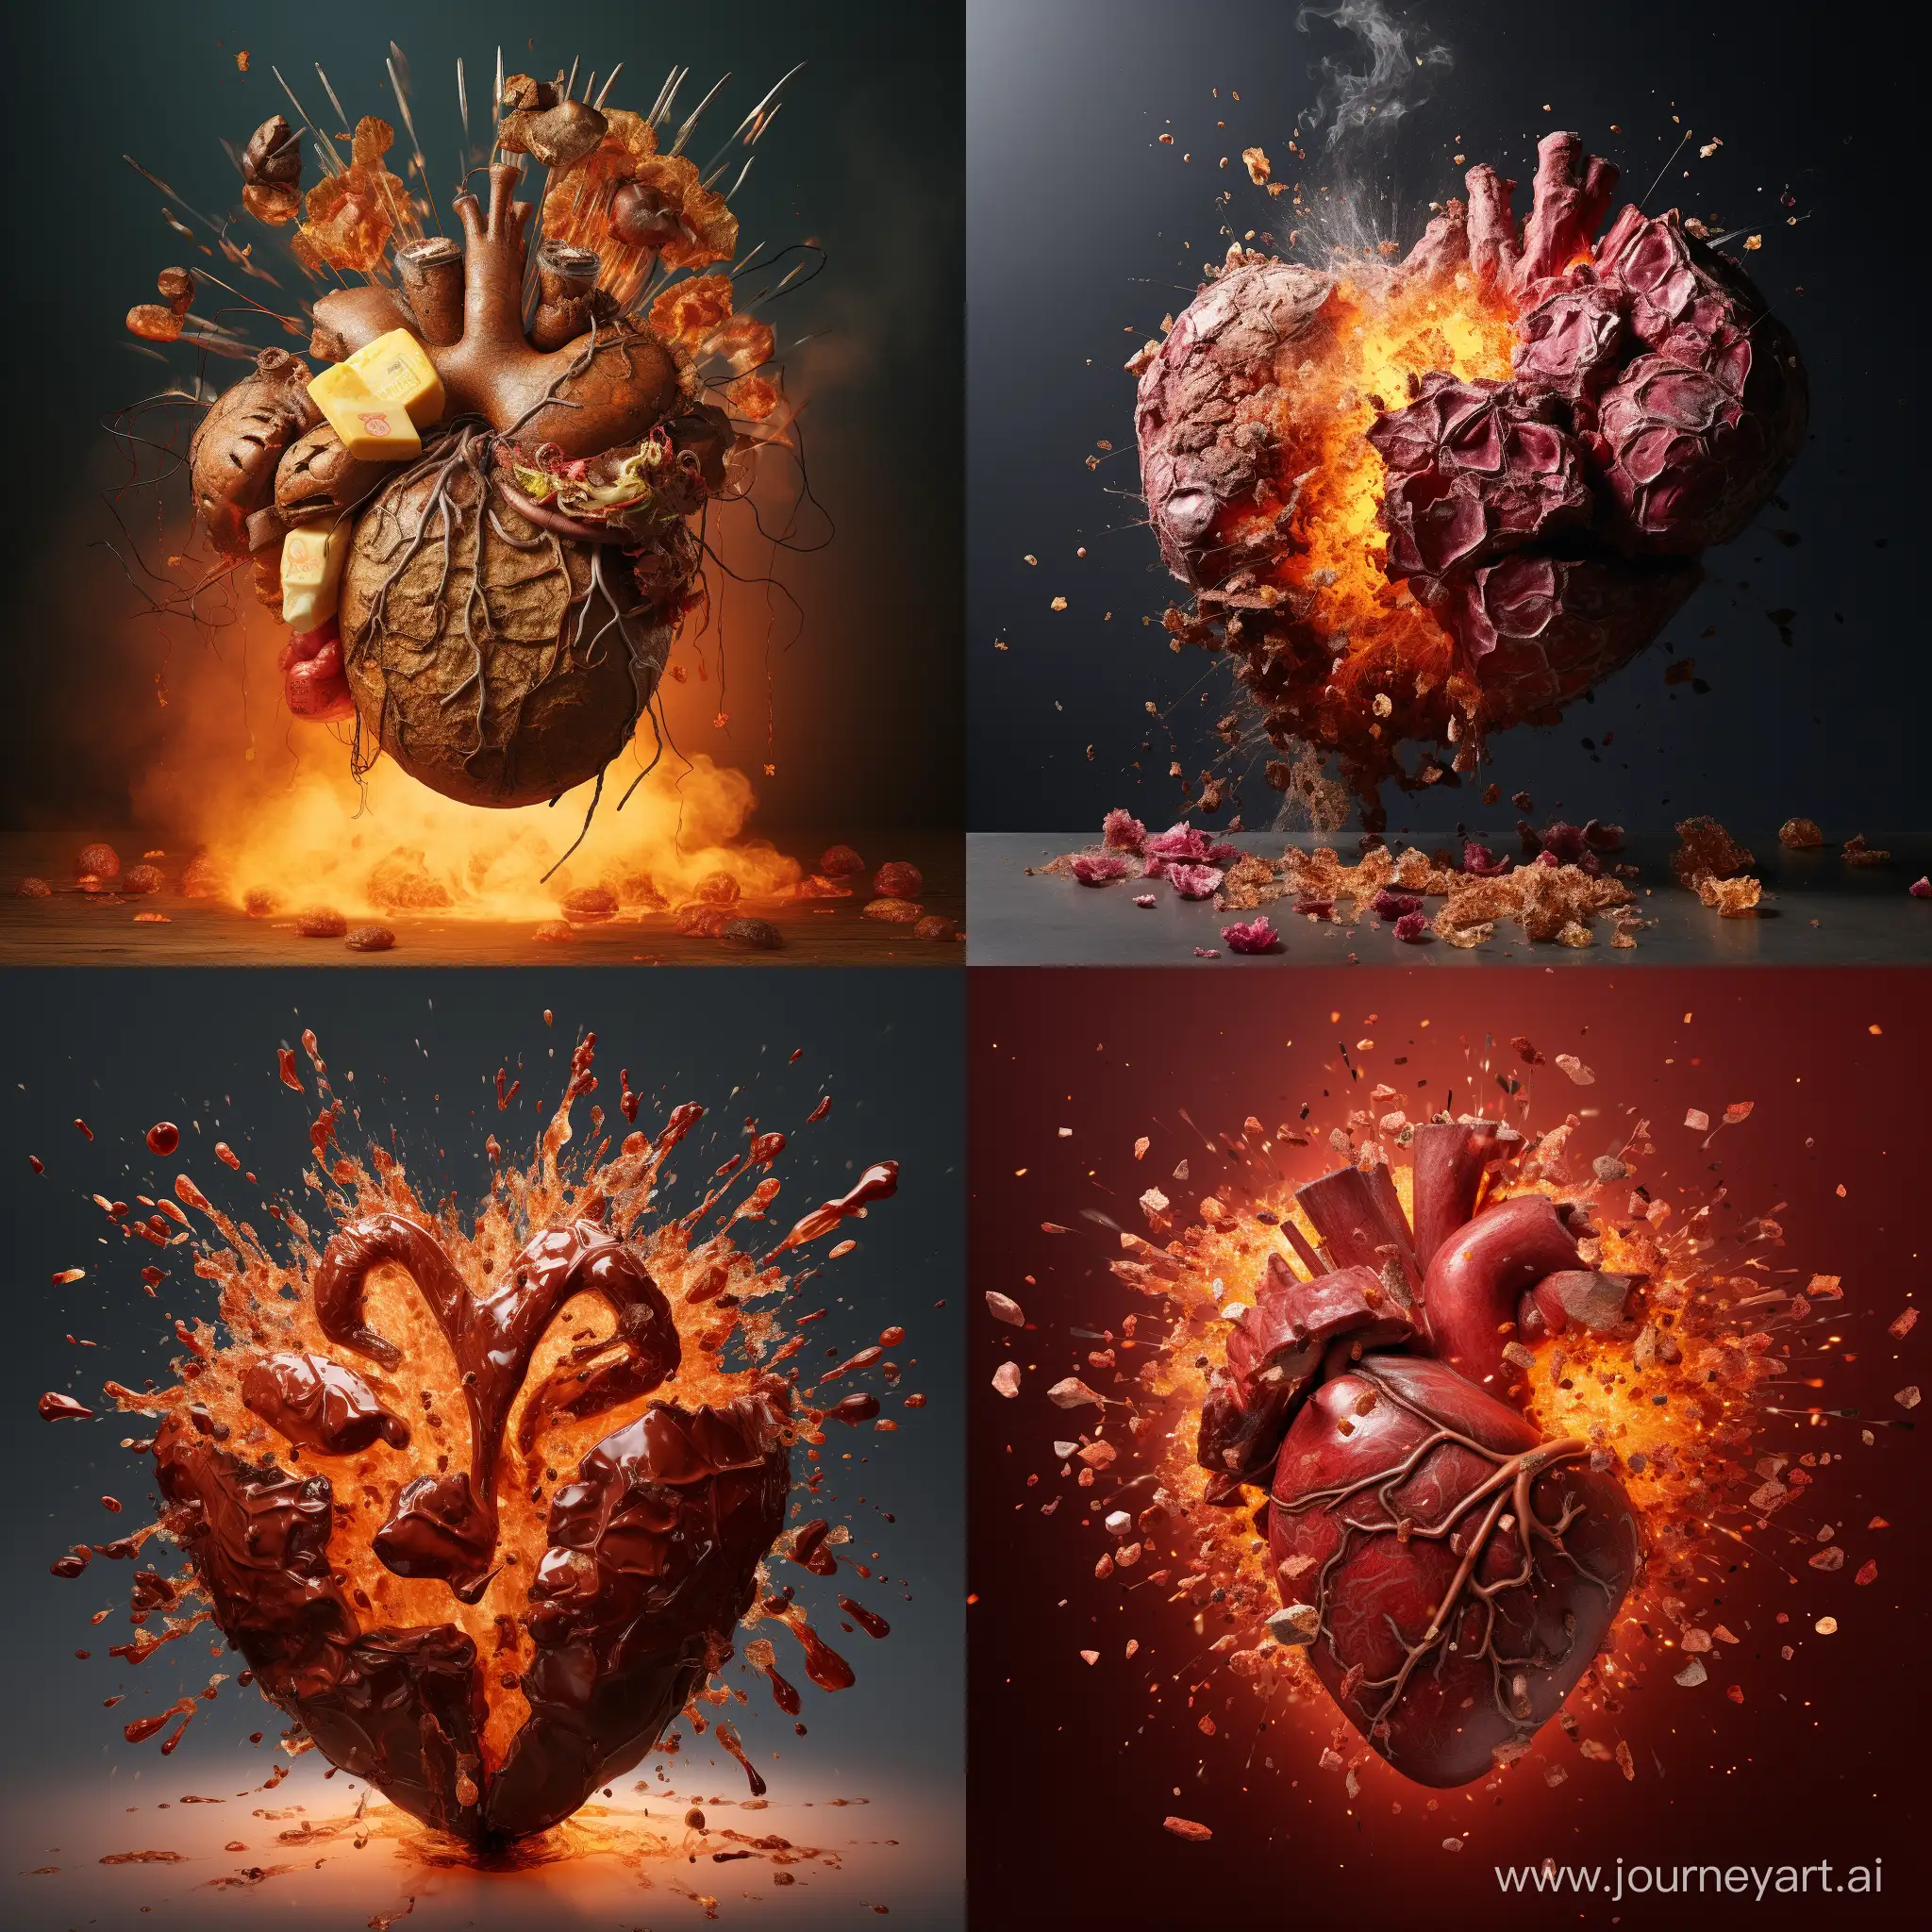 Explosive-Liver-with-Price-Tag-Art